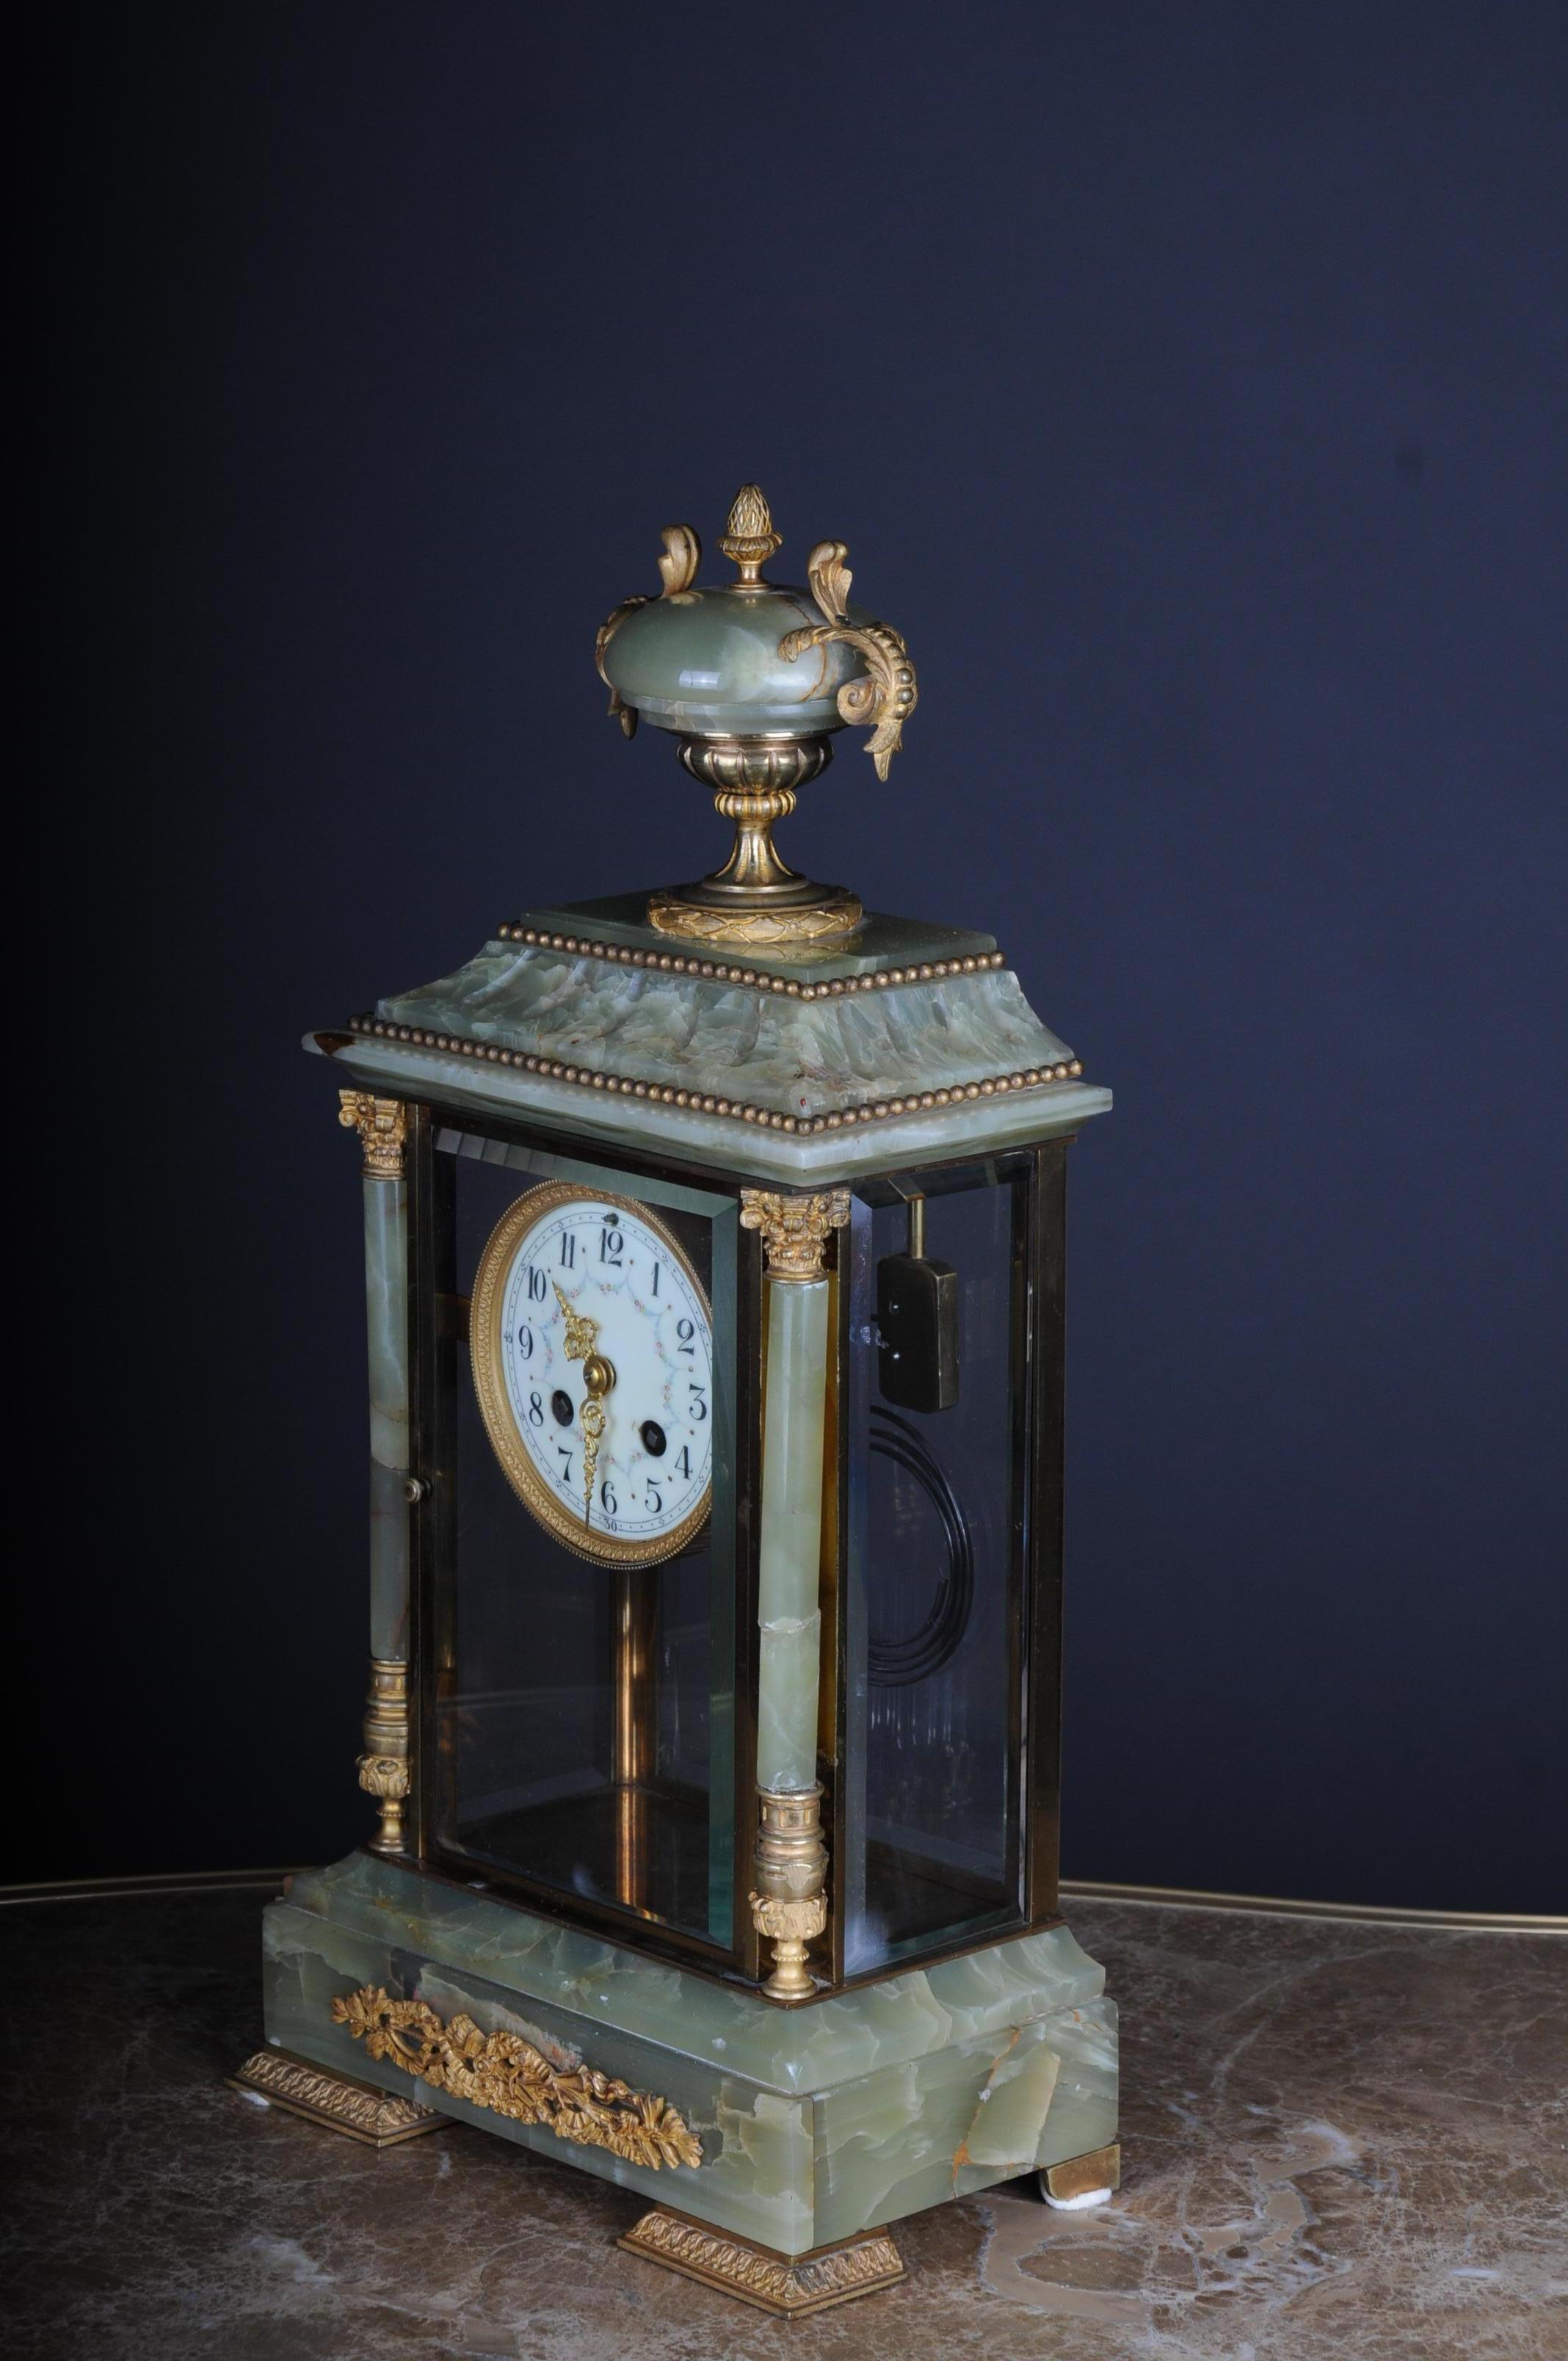 French fireplace clock onyx 1889 L.Marti et Cie Napoleon III
Onyx marble case with fire-gilt fittings circa 1889. The movement is signed with the inscription 